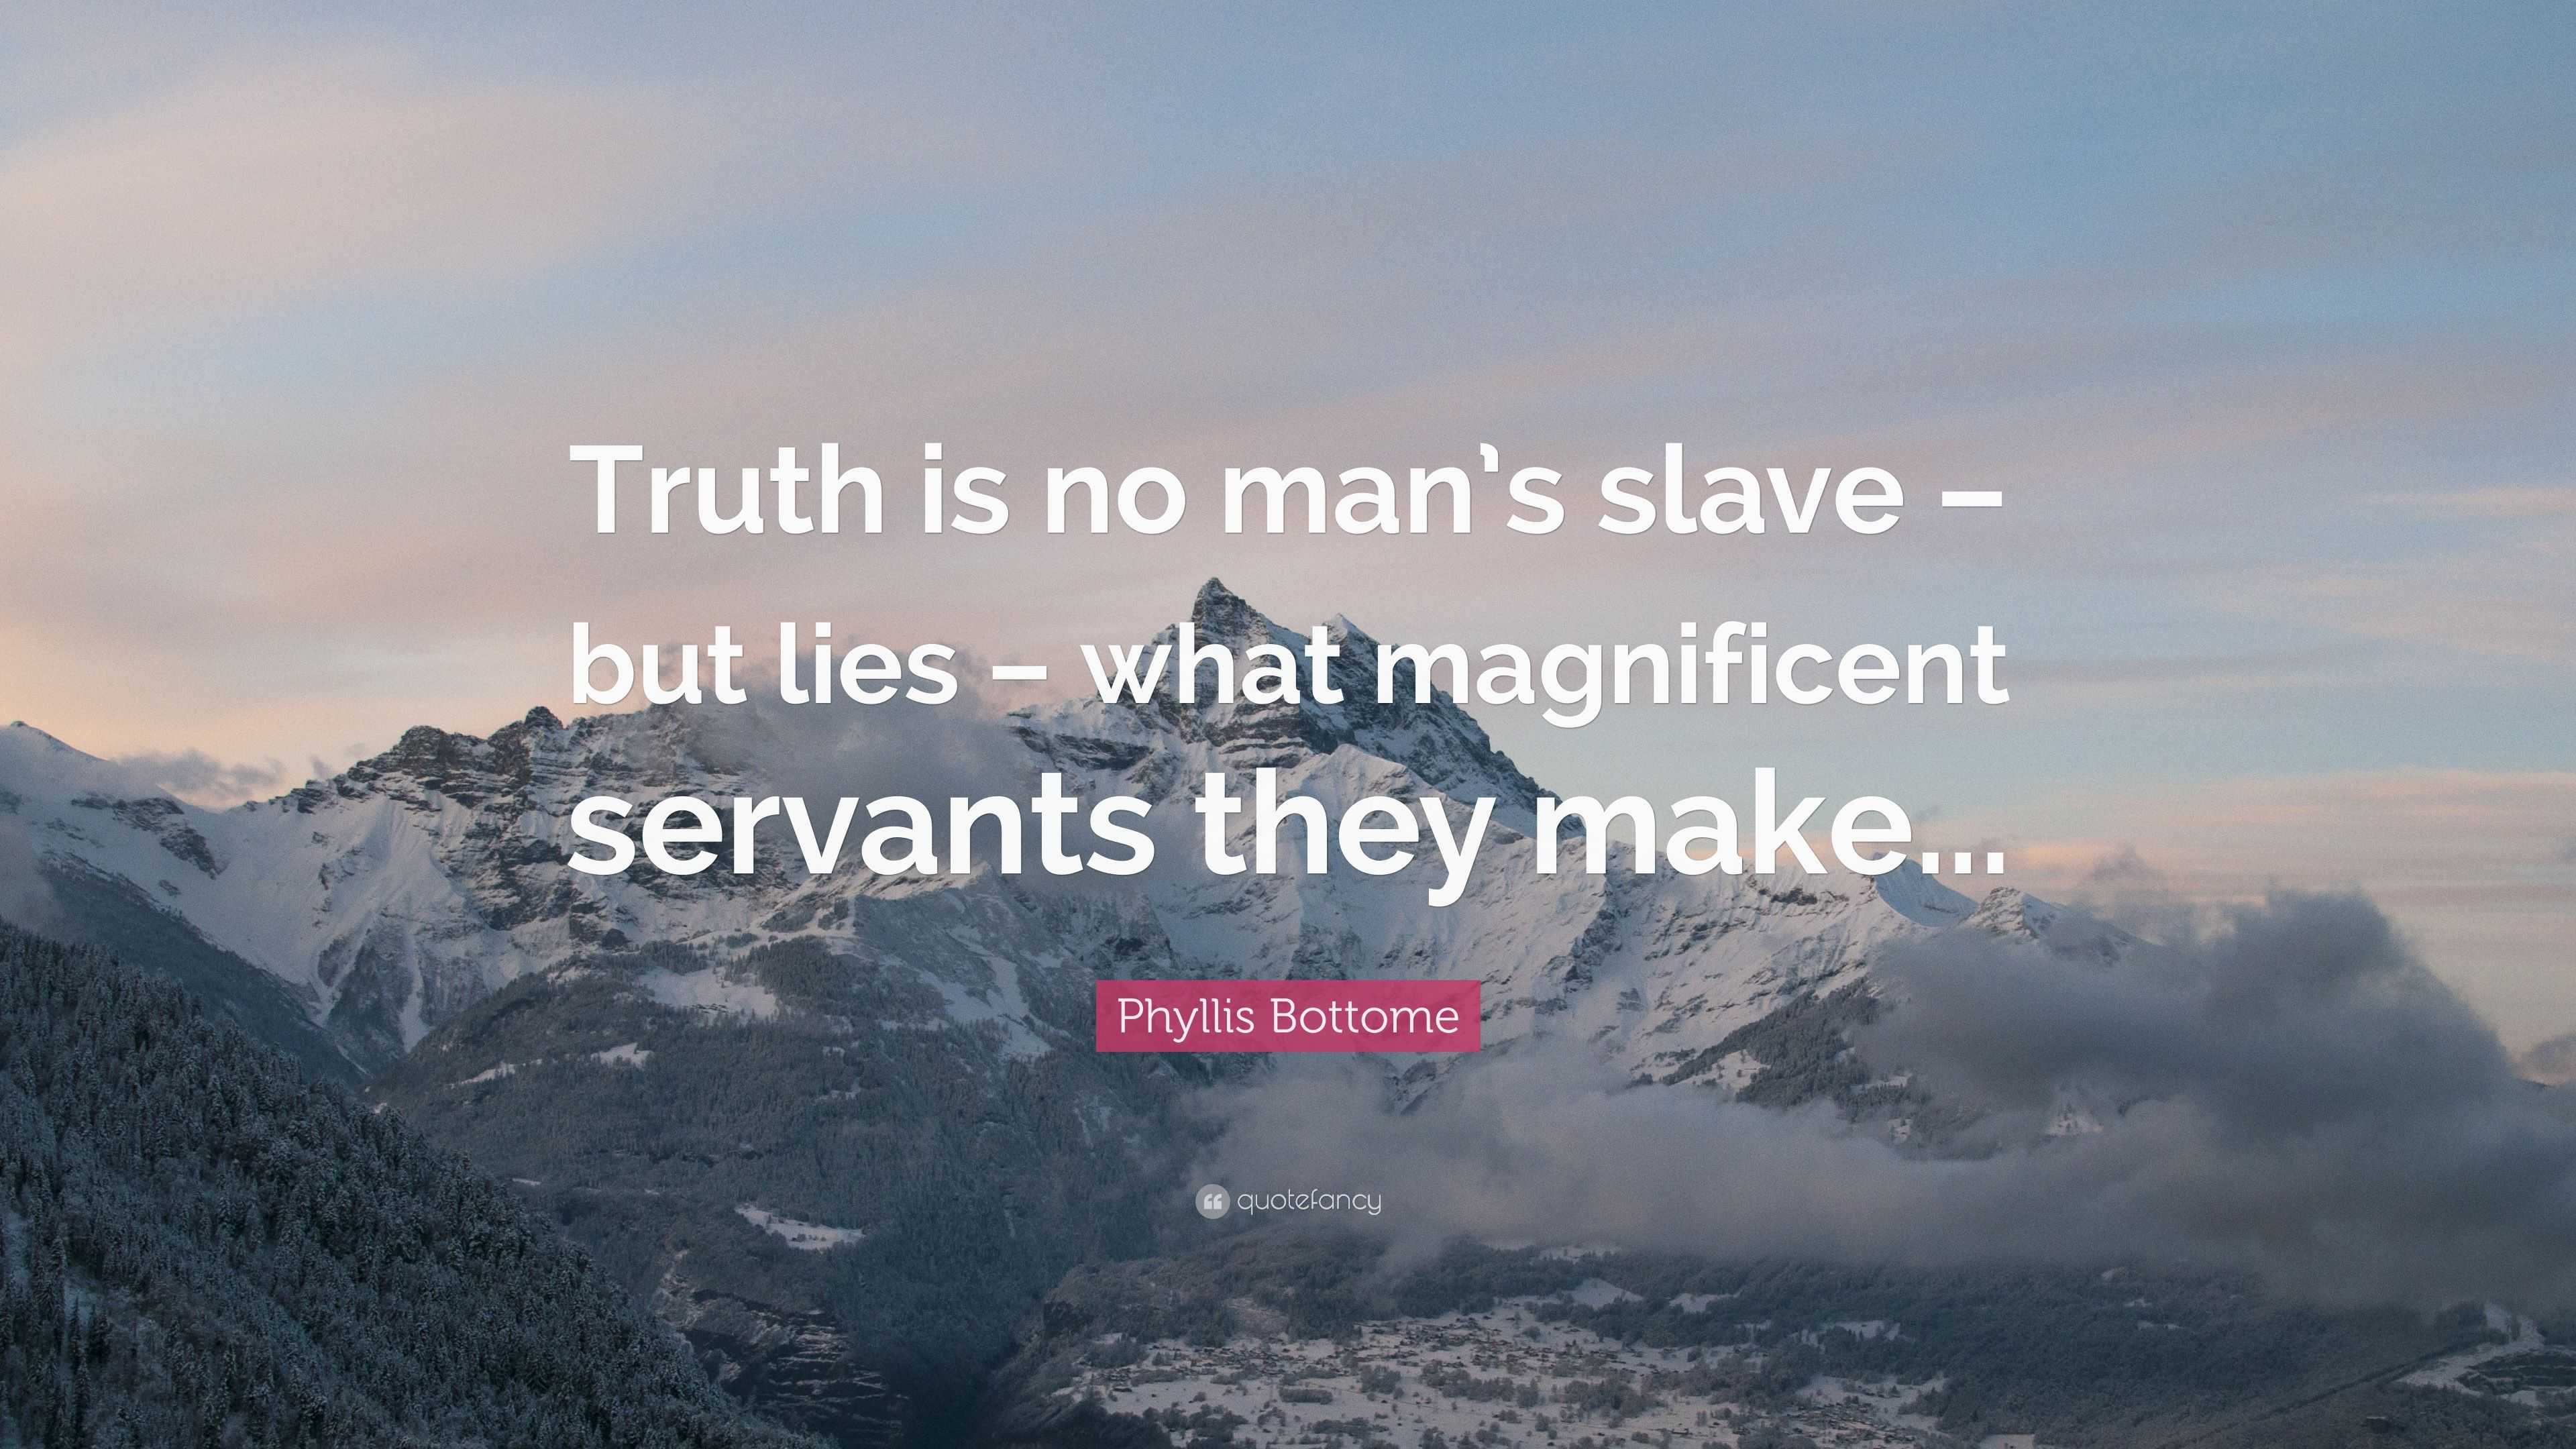 Phyllis Bottome Quote: “Truth is no man’s slave – but lies – what ...